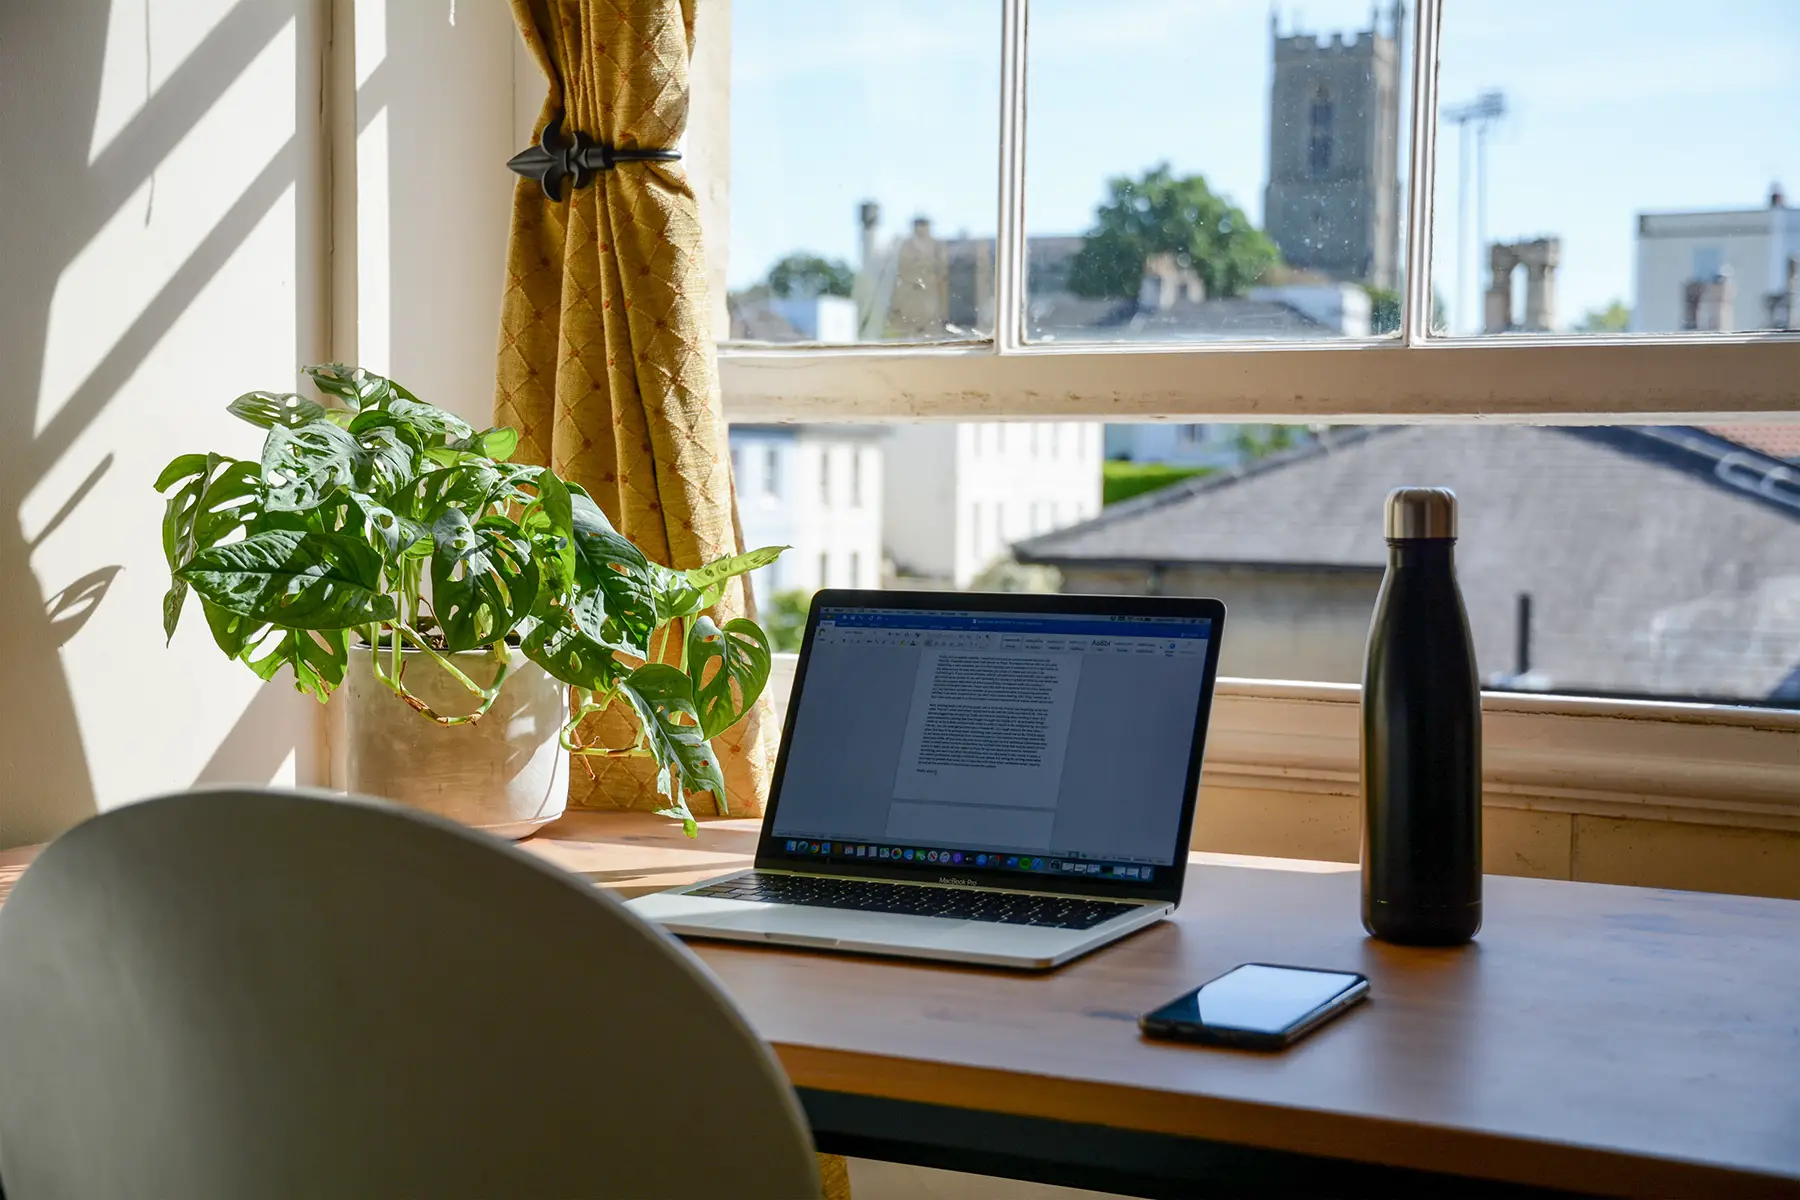 A desk with a laptop, bottle of water, and smartphone on it. The desk is by an open window showing a view of Bristol (old buildings including cathedral)